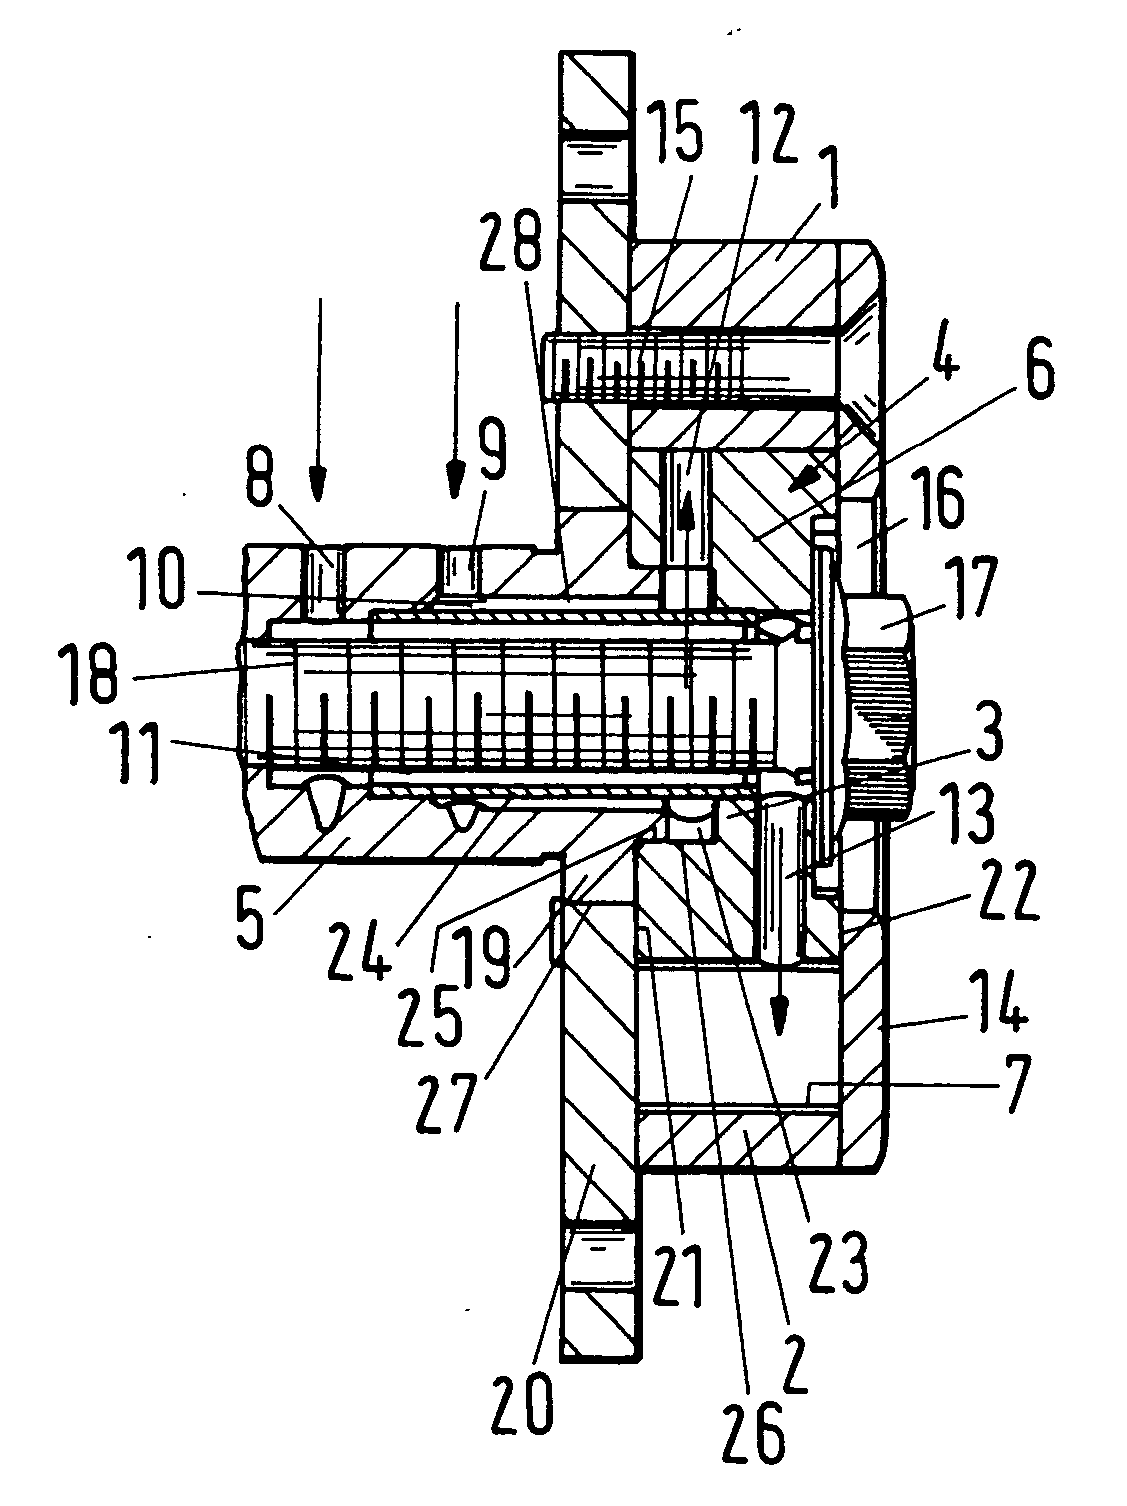 Device for Adjusting a Camshaft of an Internal Combustion Engine of a Motor Vehicle